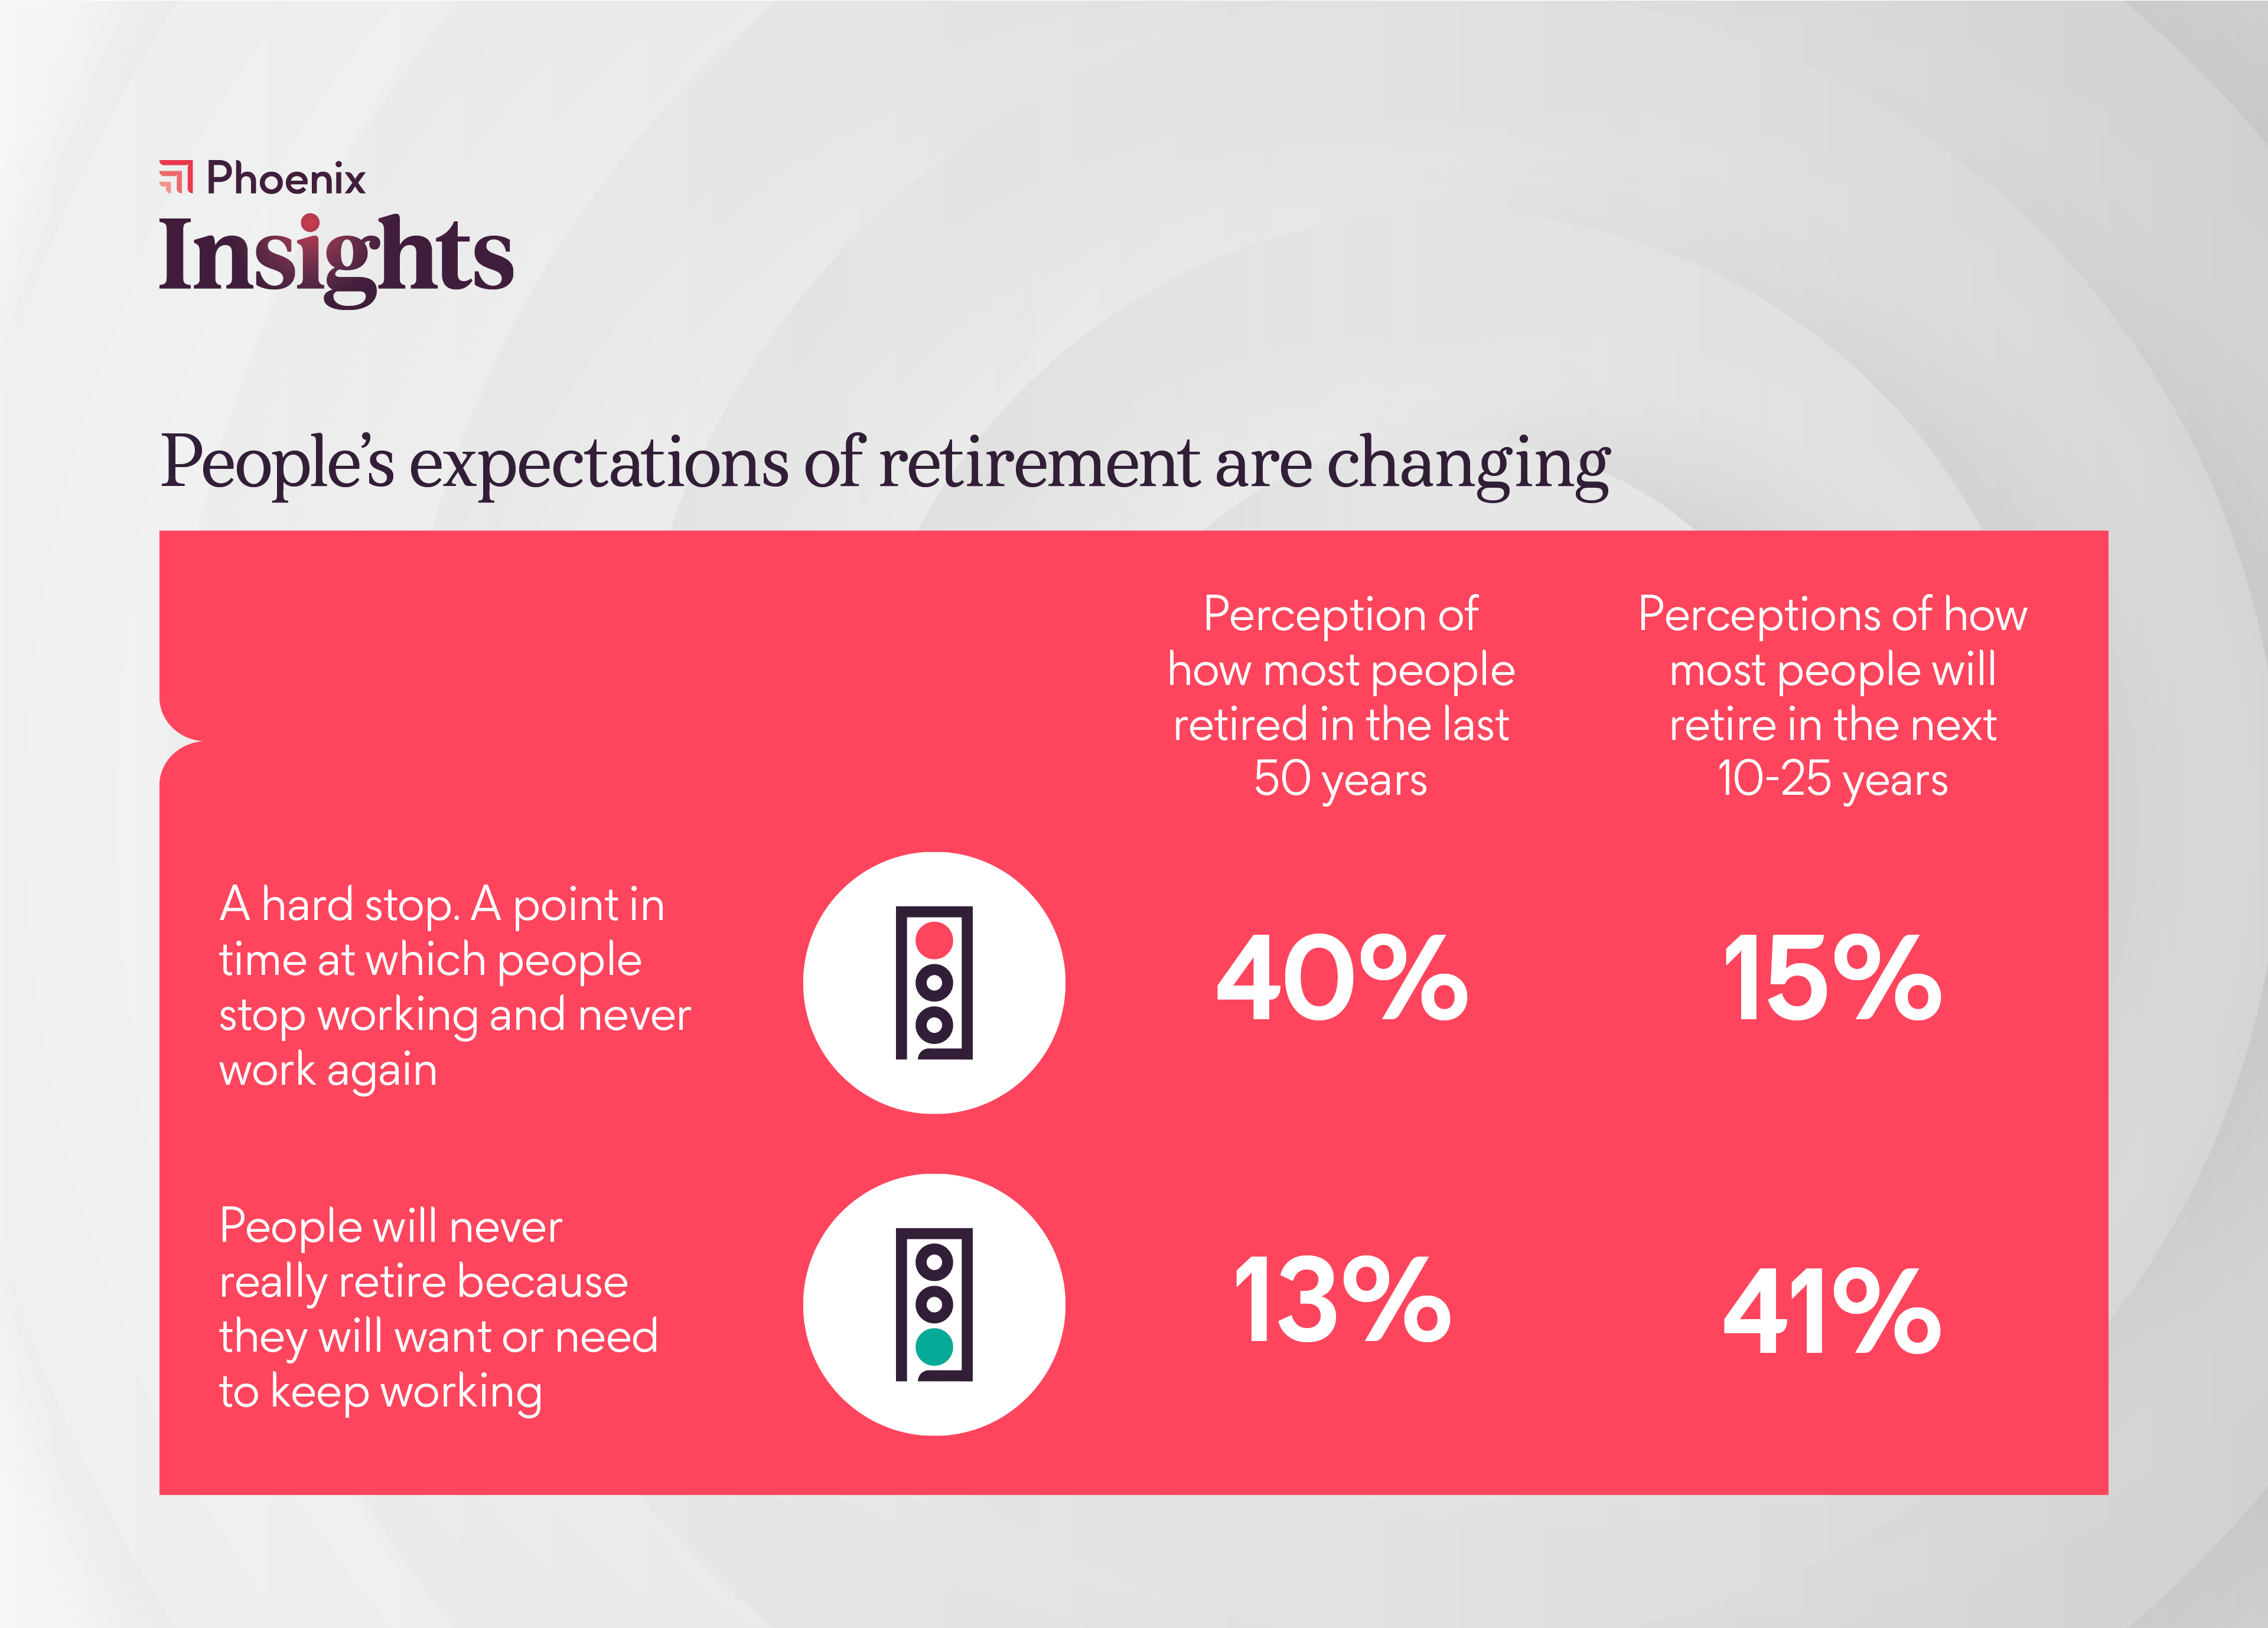 People's expectations of retirement are changing. Looking at the last 50 years 40% of people expected a hard stop retirement while just 13% expected to keep working in some capacity. Looking at the next 10-25 years this trend reverses, with 41% expecting to continue working and just 15% expecting a hard stop. 